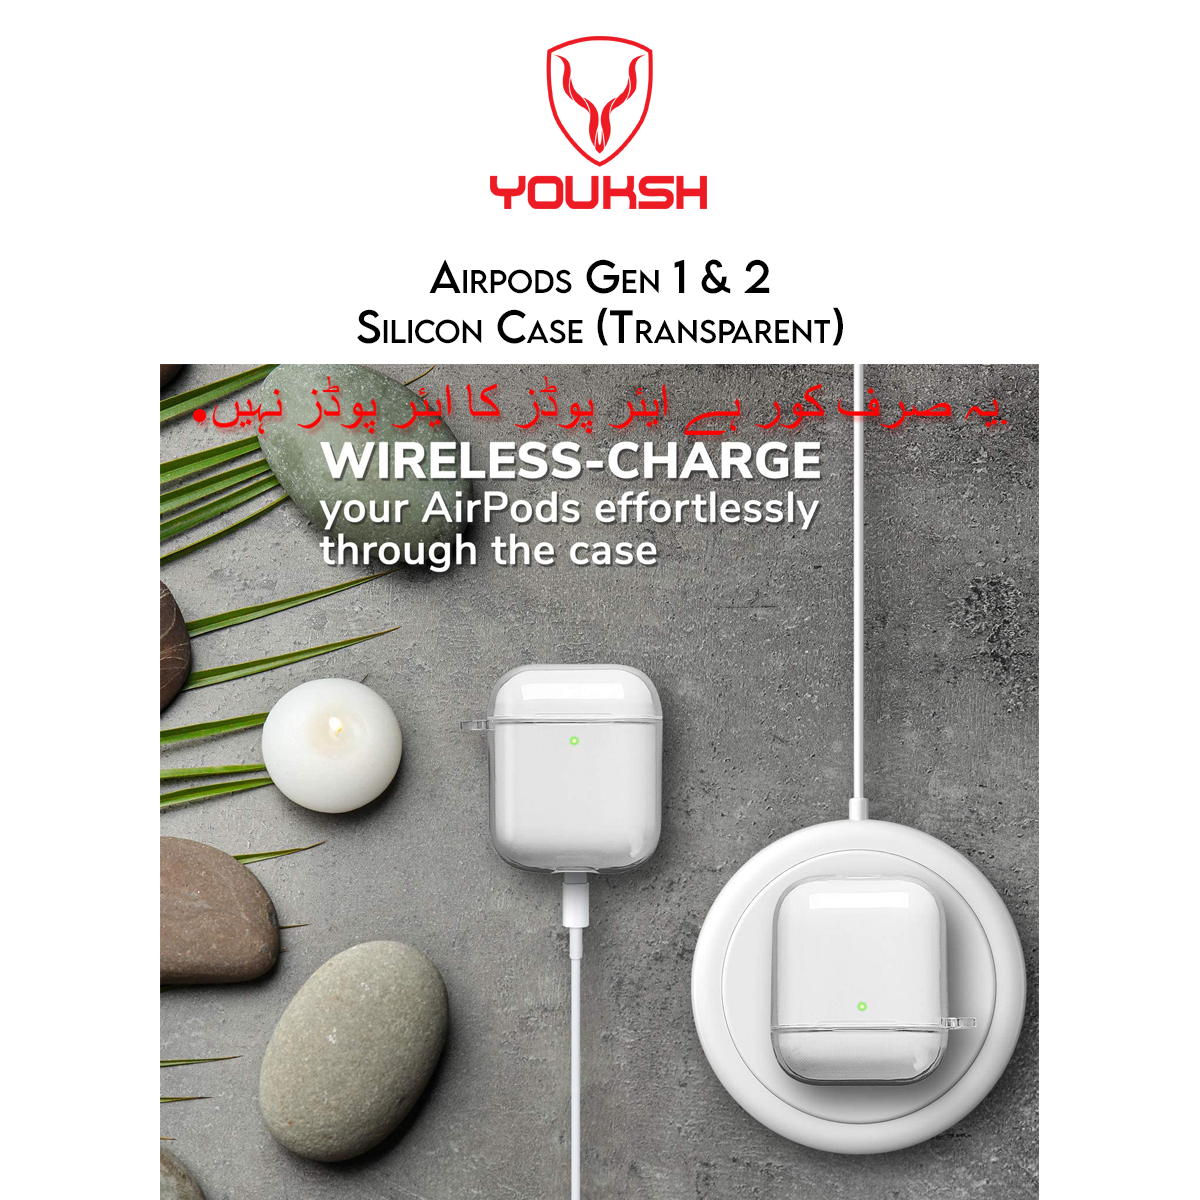 YOUKSH Airpods (Series 1 & 2) Transparent Case - Airpods (Series 1 & 2) Transparent Silicone Cover - Airpods (Series 1 & 2) High Quality Transparent Case Only.